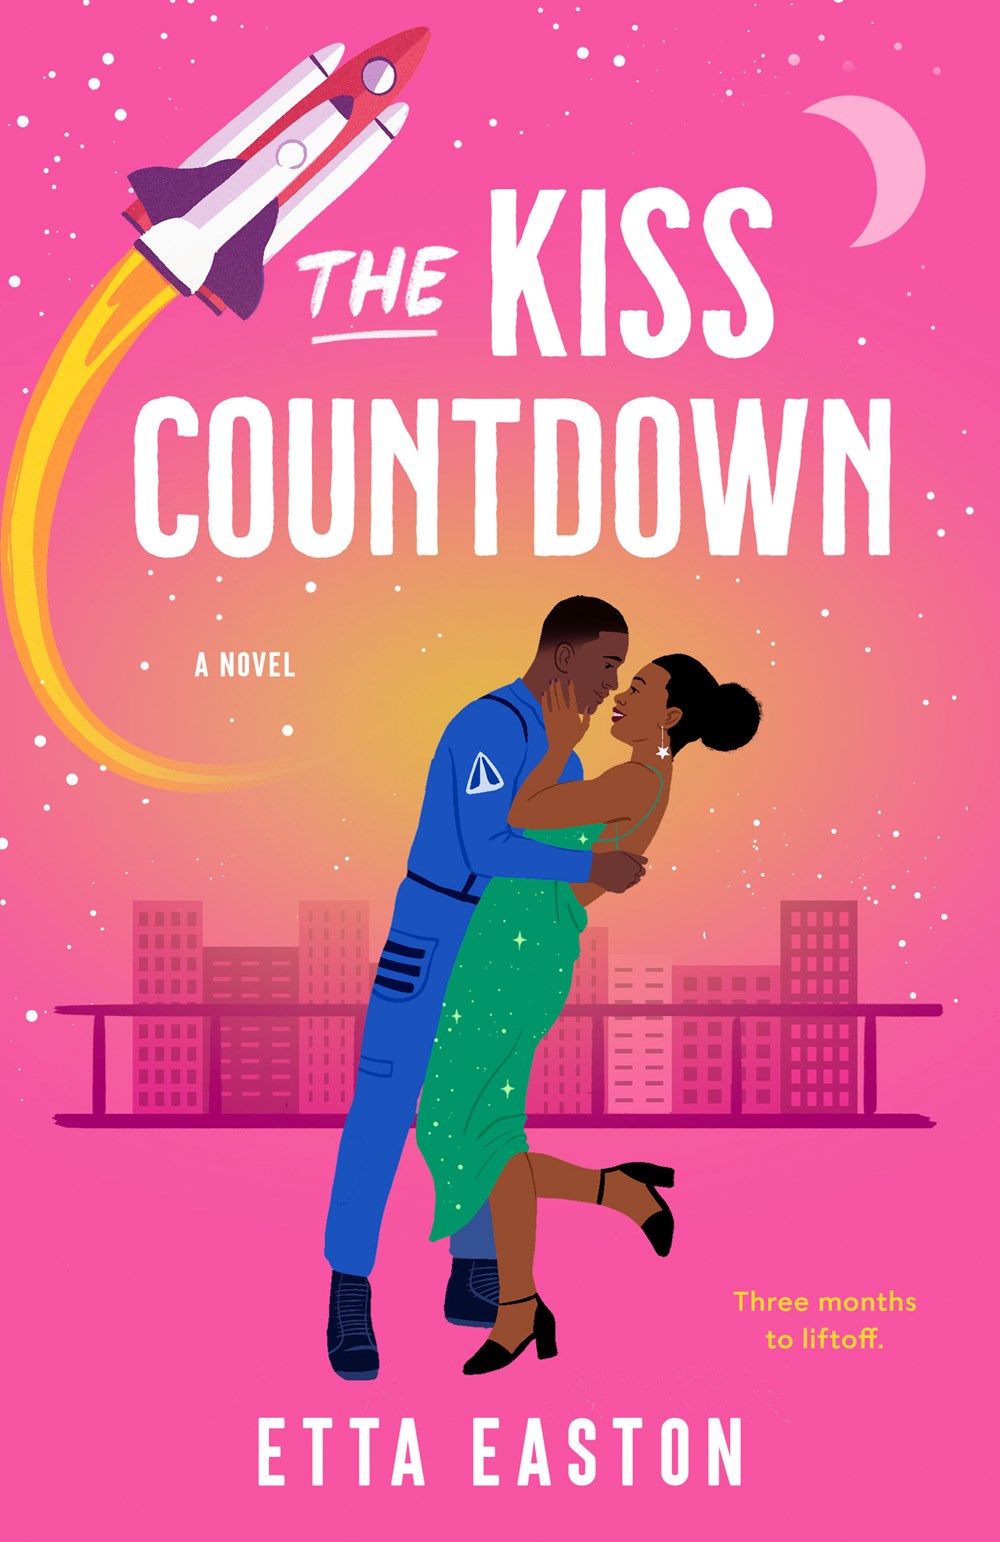 The Kiss Countdown by Etta Easton (Paperback) (PREORDER)